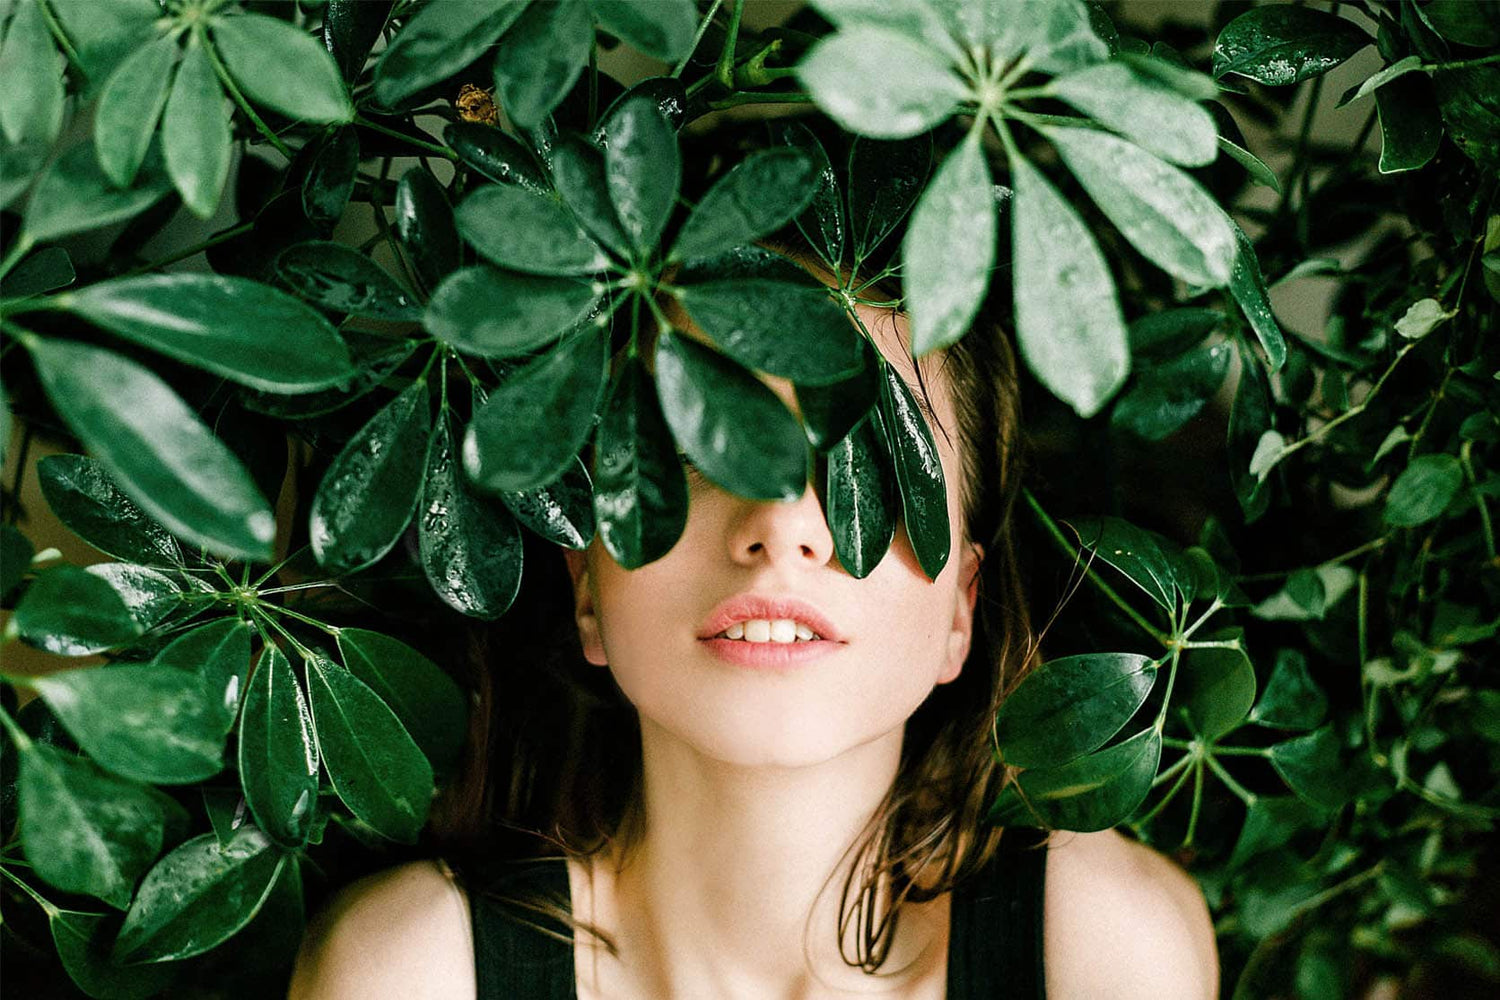 Woman lying in a bed of wet leaves slightly covering the top half of her face